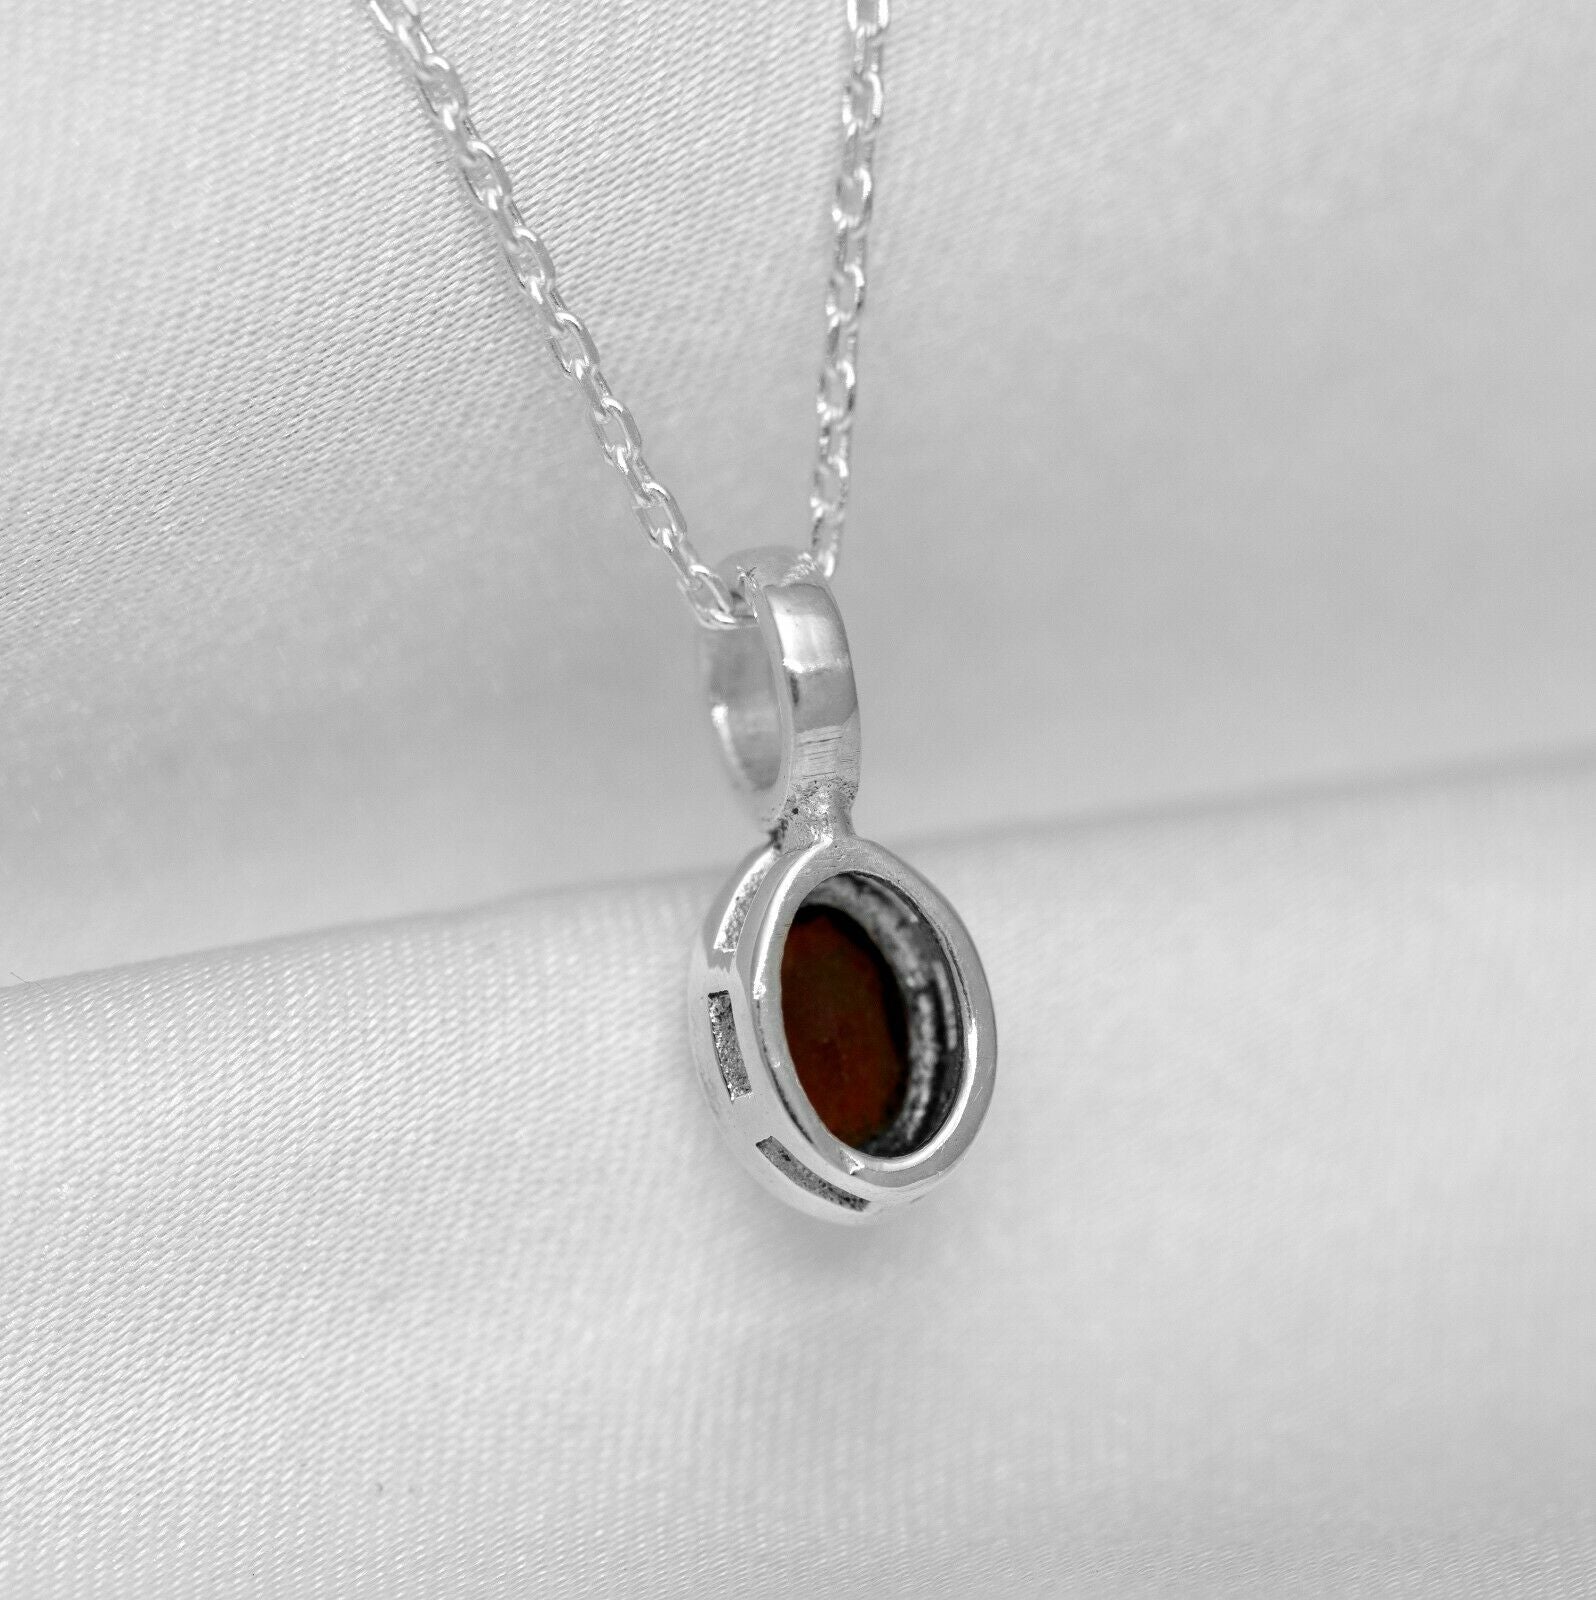 Small Oval Red Garnet Sterling 925 Silver Pendant Necklace Ladies Jewellery Gift